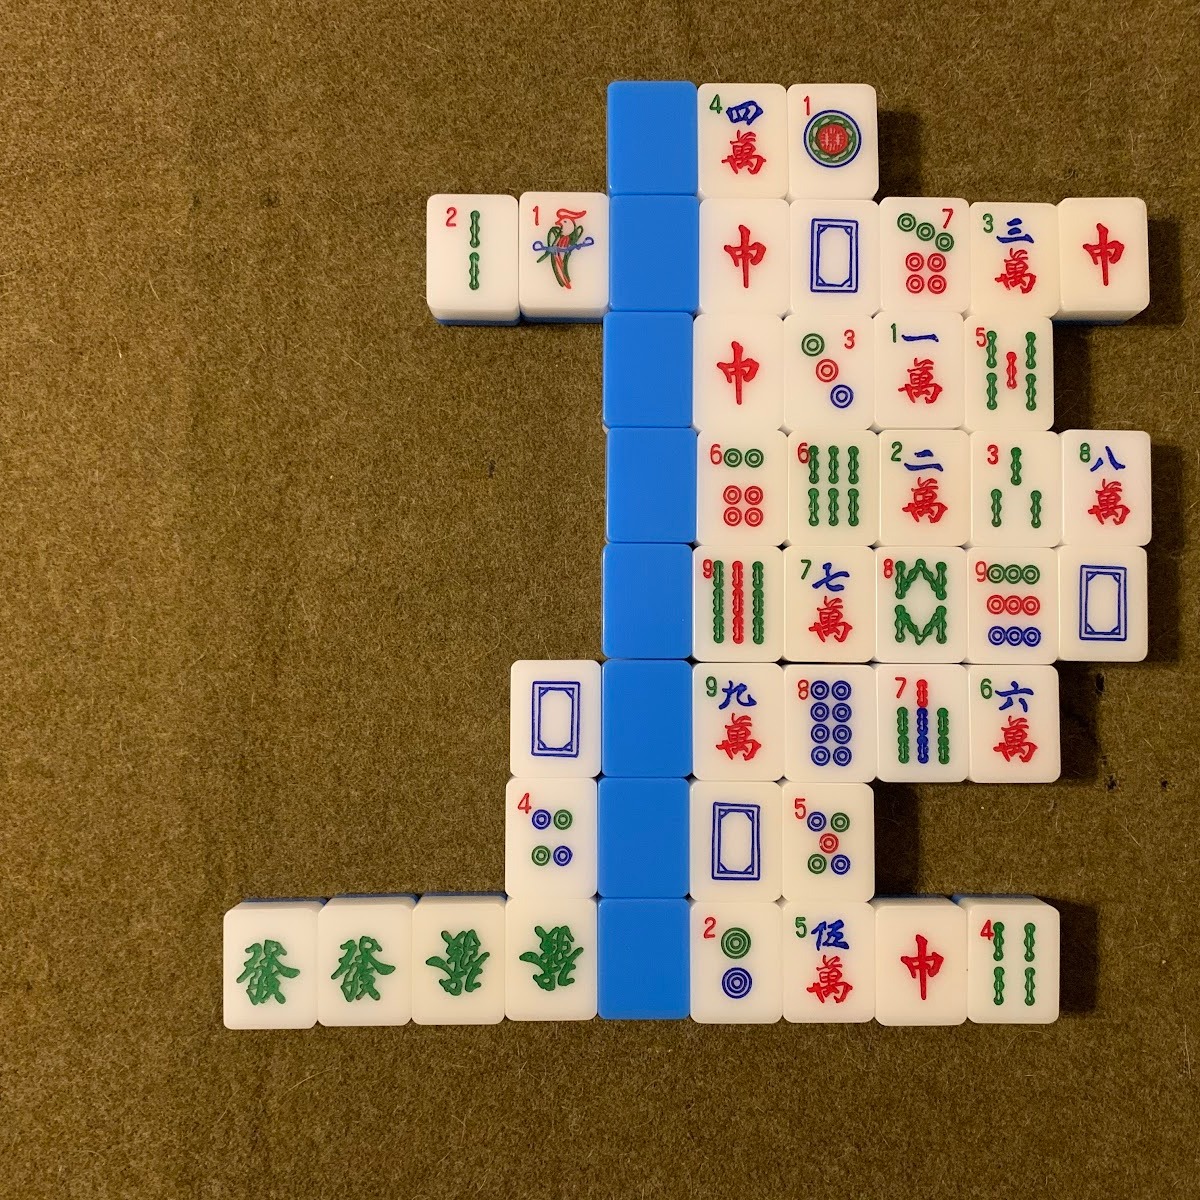 Mahjong for one? How to play mahjong solitaire